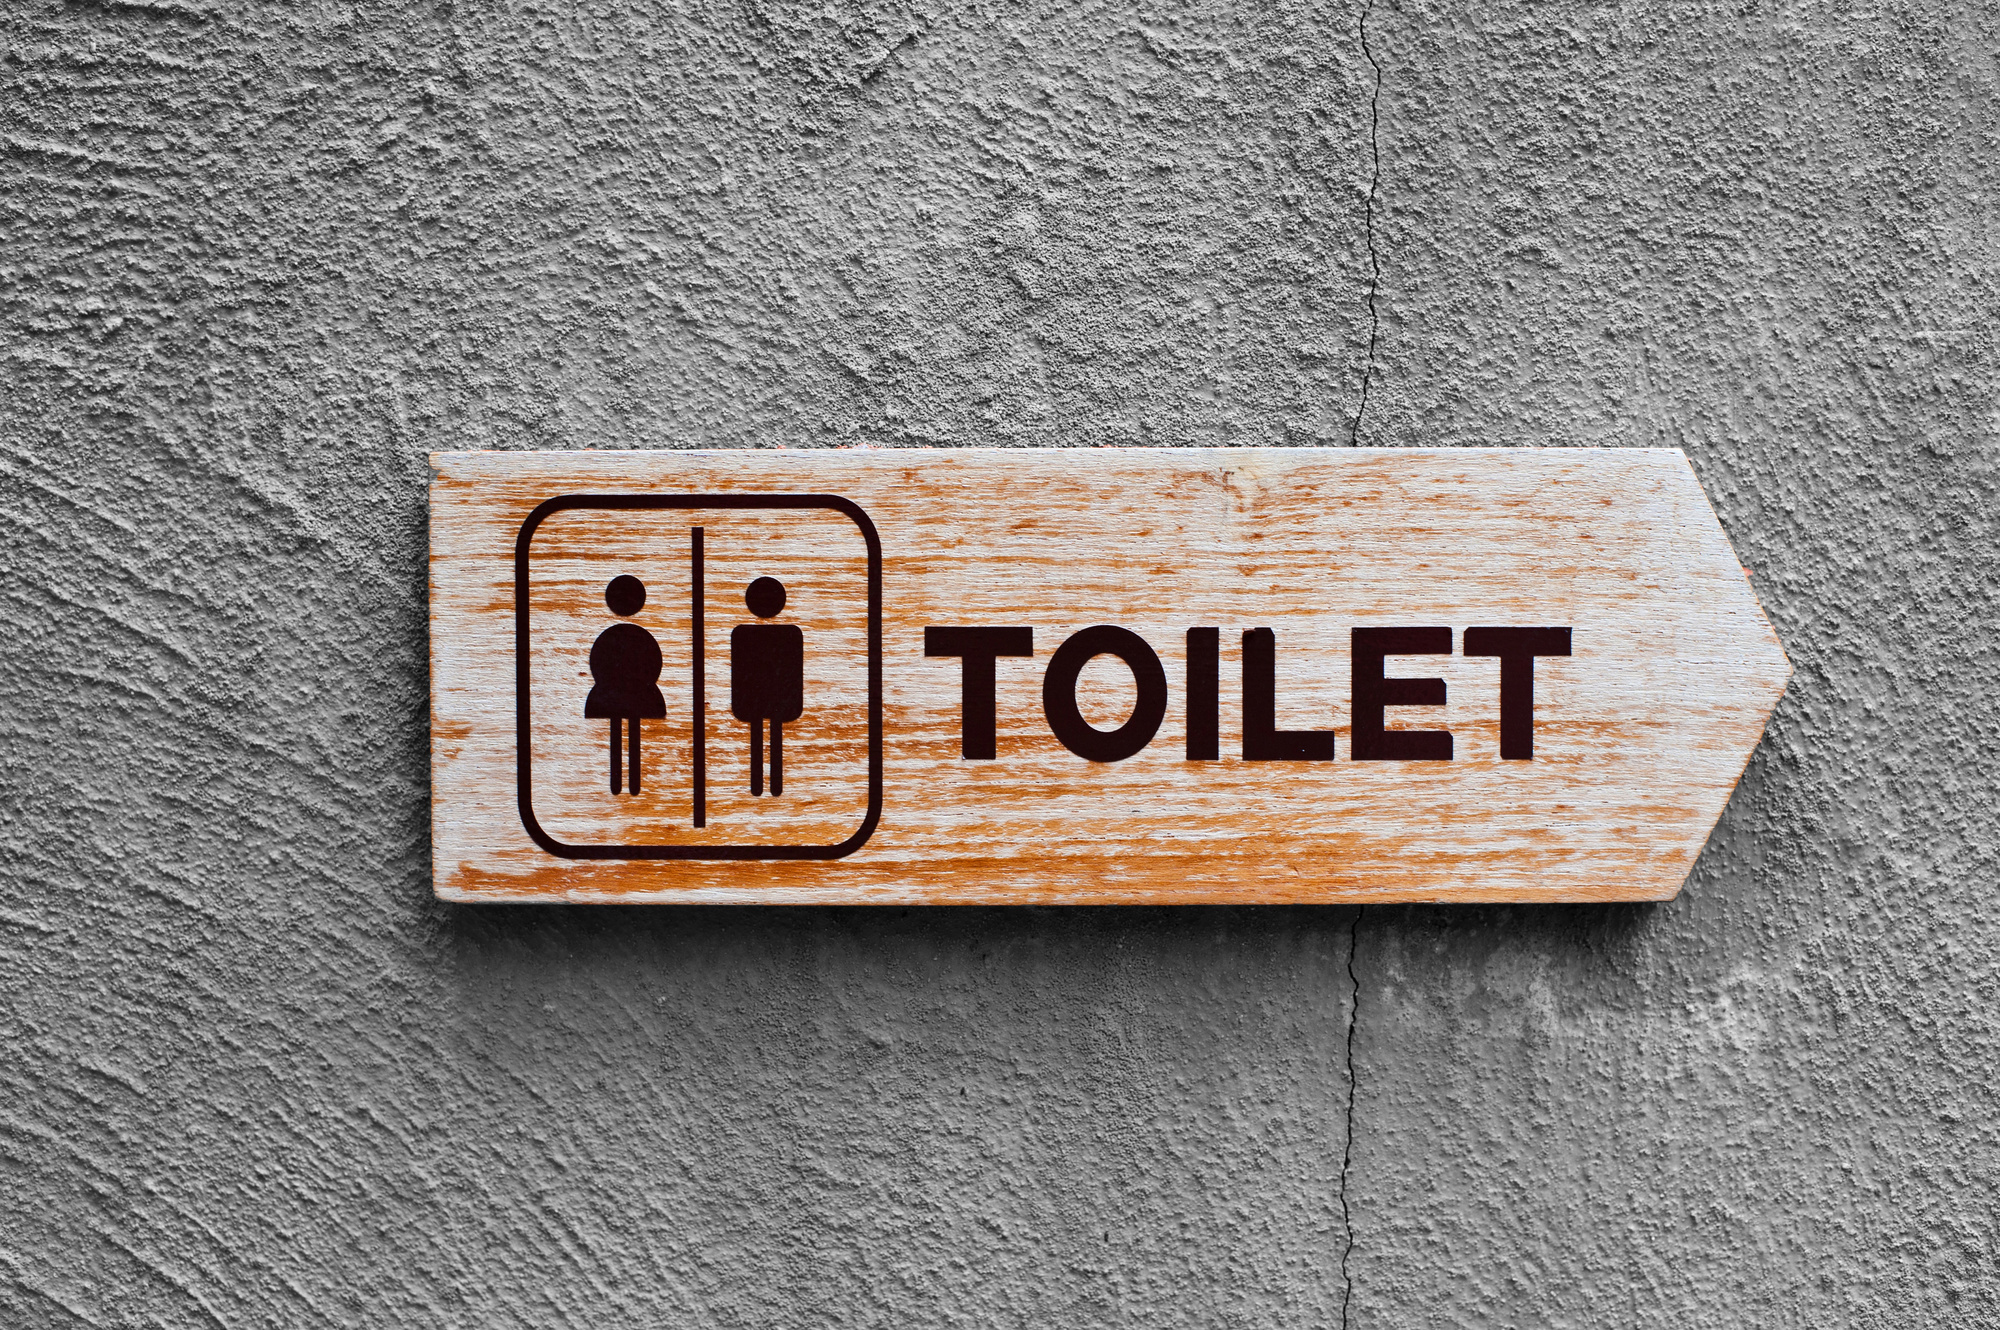 5 Smart Toilet Benefits You May Not Have Realized